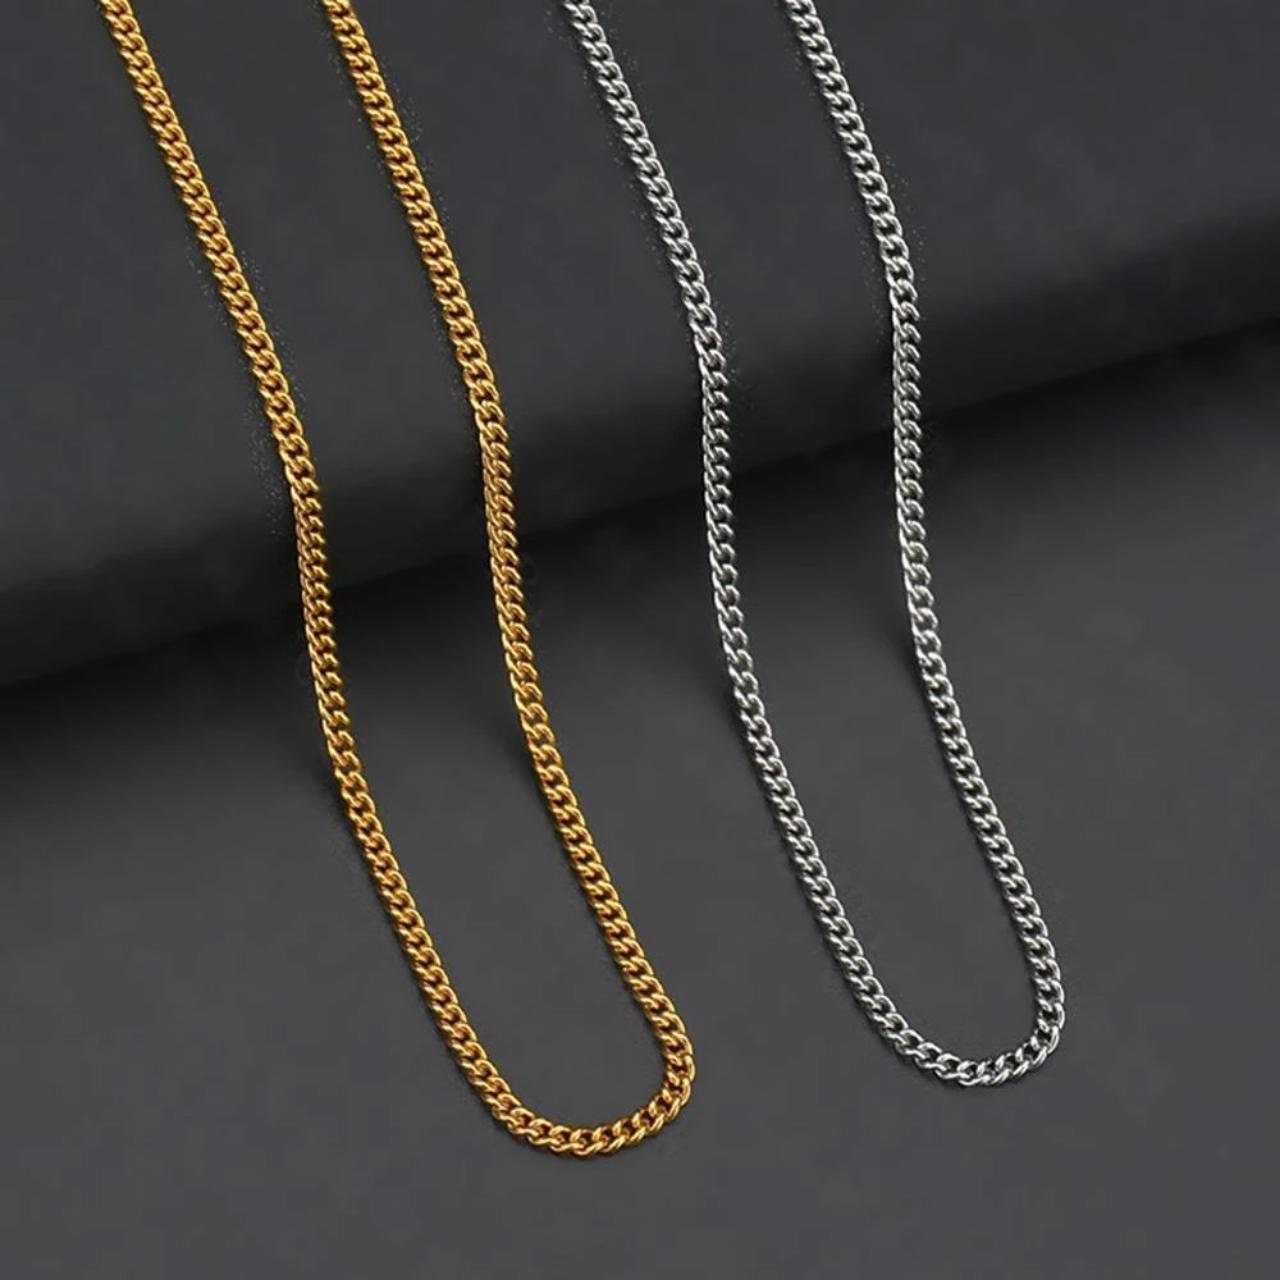 CRW Alien Head Necklace with 1.8mm curb link chain in gold - Area 51 Necklace for Women - Geometric Necklace for Men - Necklace with Pendant